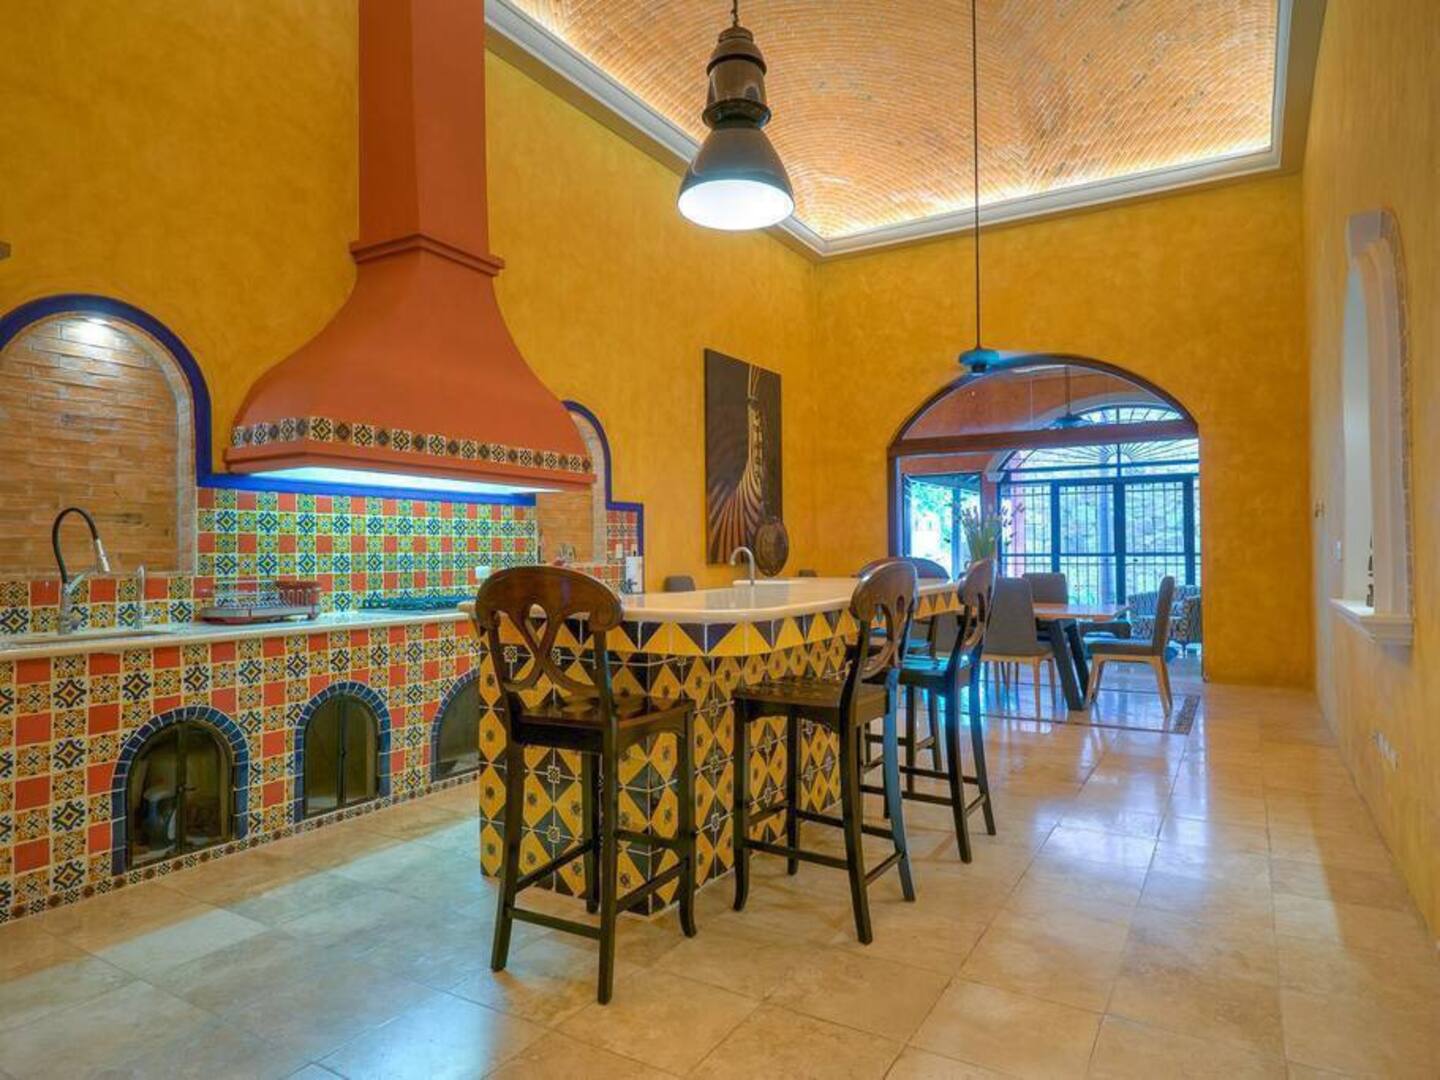 Picture of a yellow kitchen, with Mexican tile work